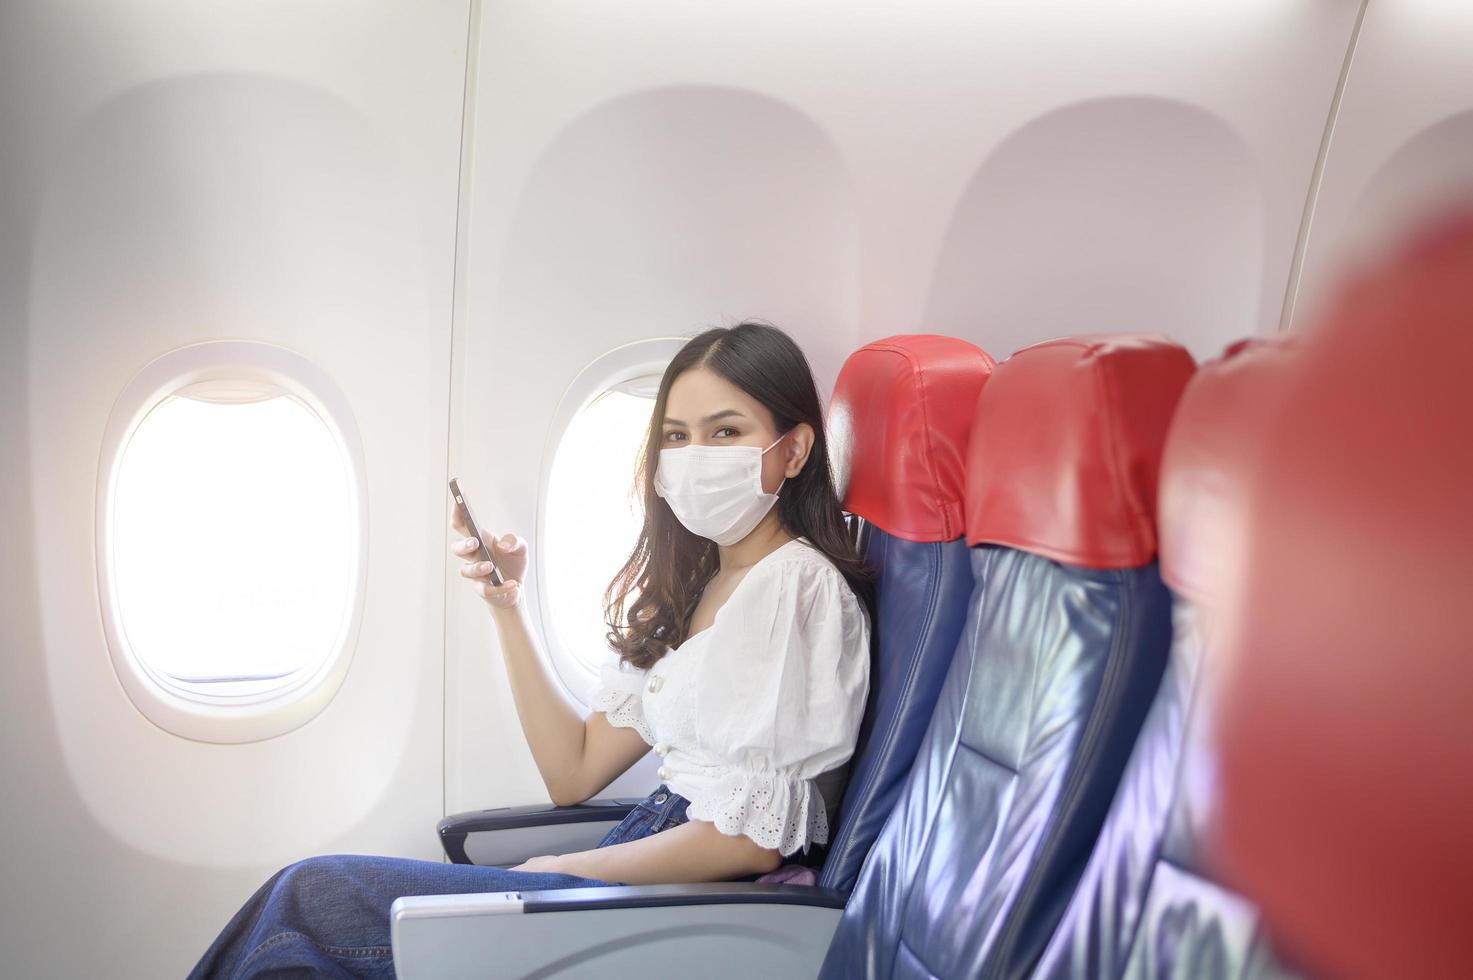 A young woman wearing face mask is using smartphone onboard, New normal travel after covid-19 pandemic concept photo